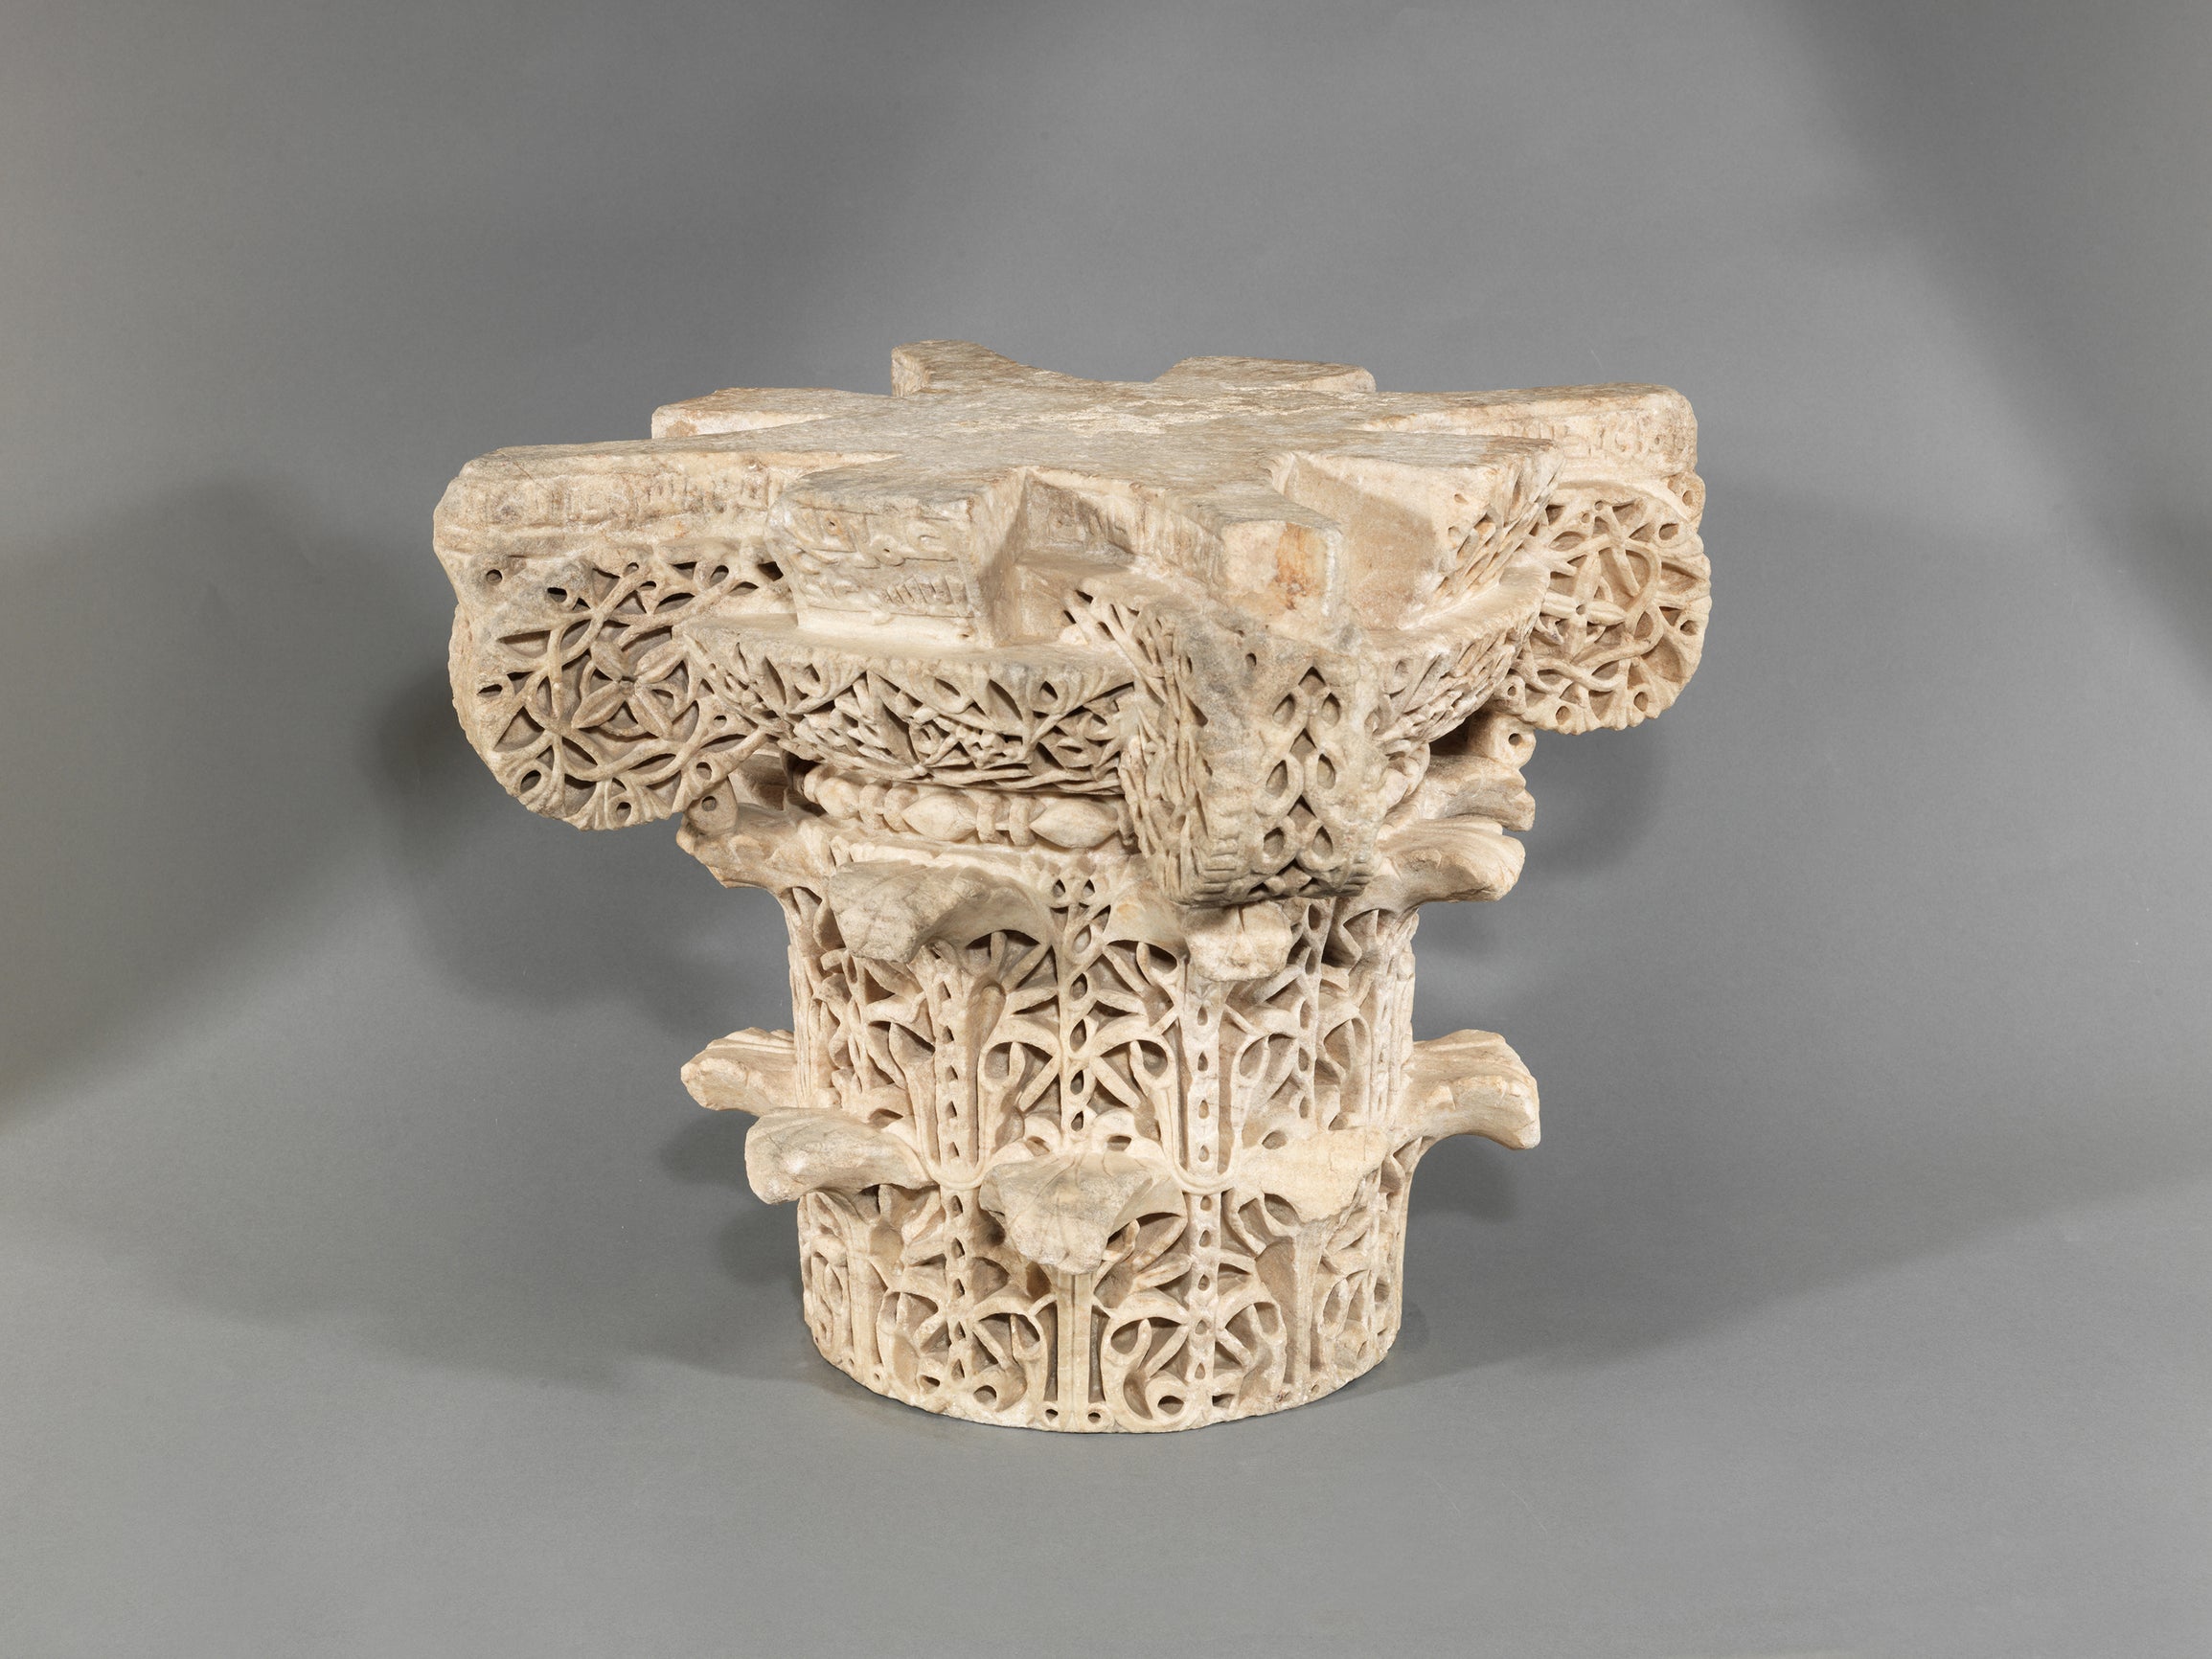 Capital, Spain, AH 362 / 972–973, marble; carved, The al-Sabah Collection, Dar al-Athar al-Islamiyyah, Kuwait, LNS 2 S, on view at the Museum of Fine Arts, Houston